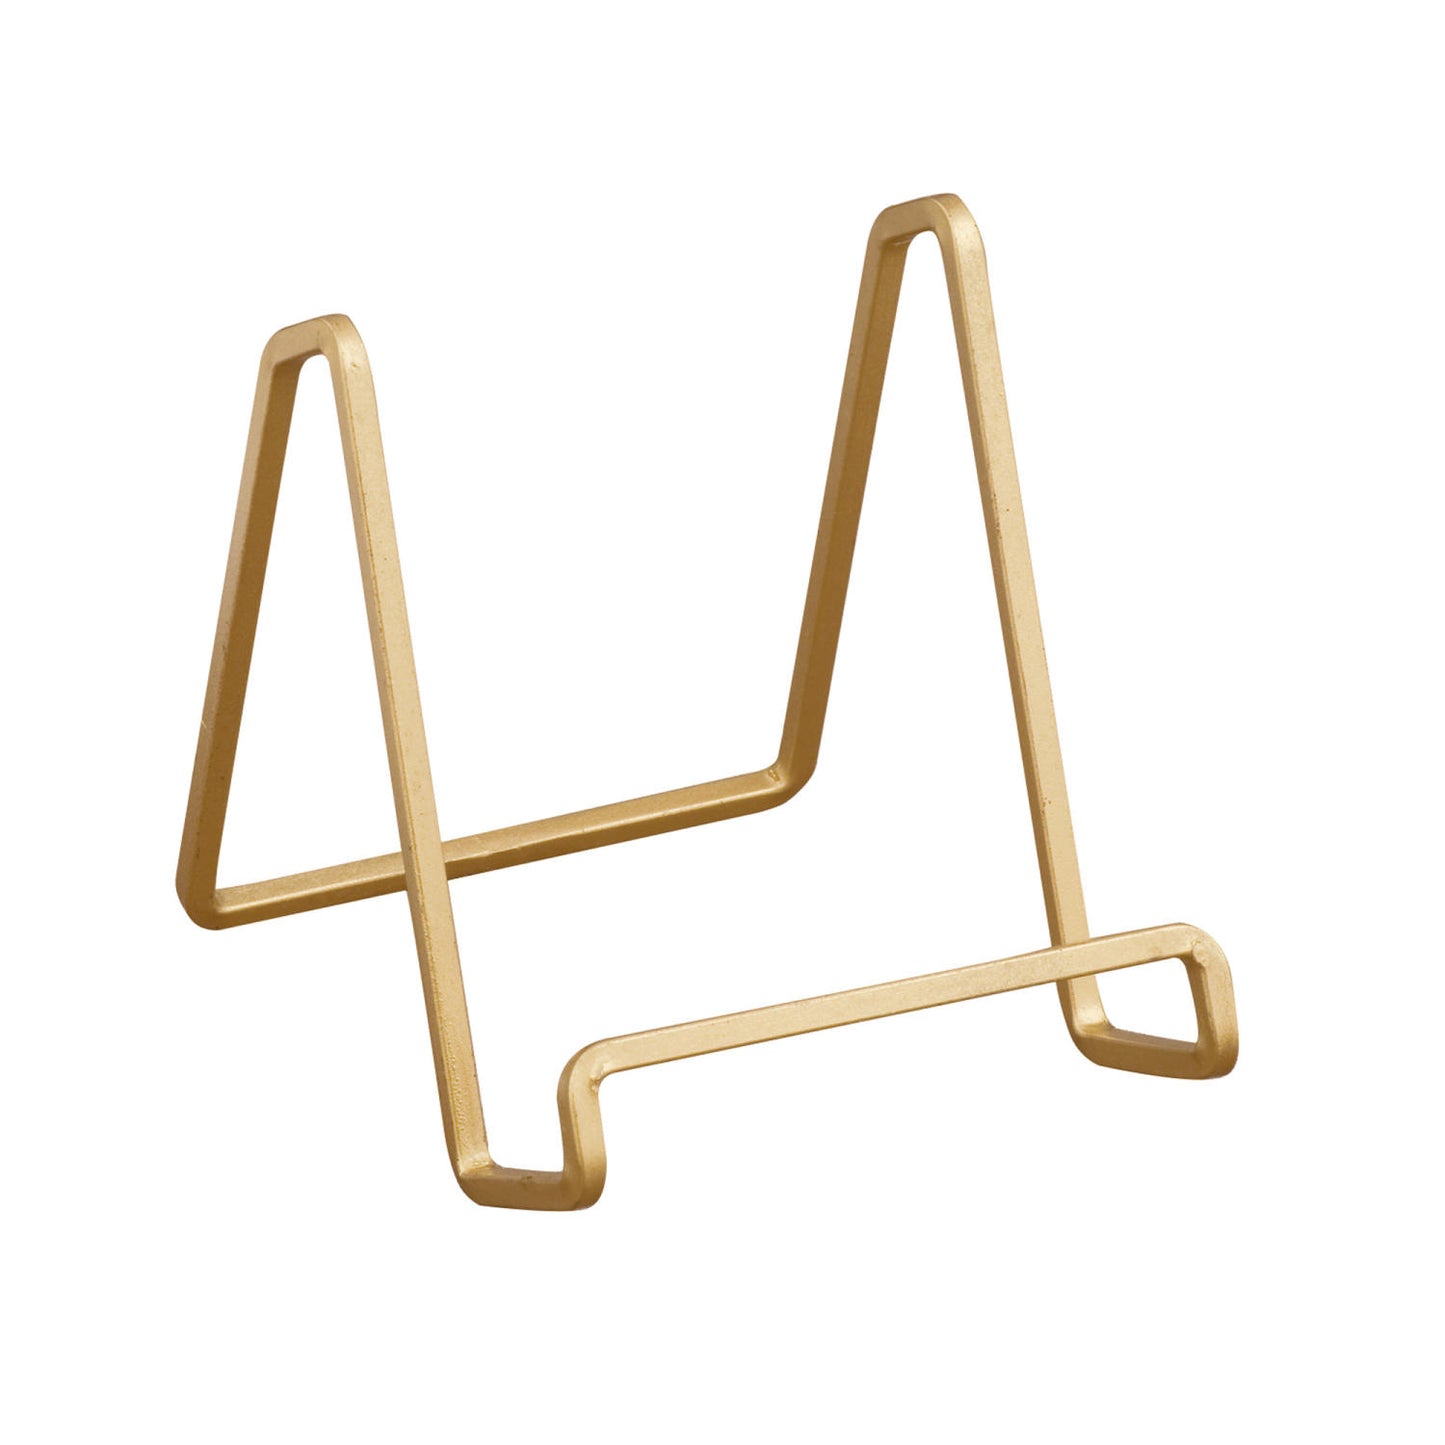 6 Inch Gold Easel